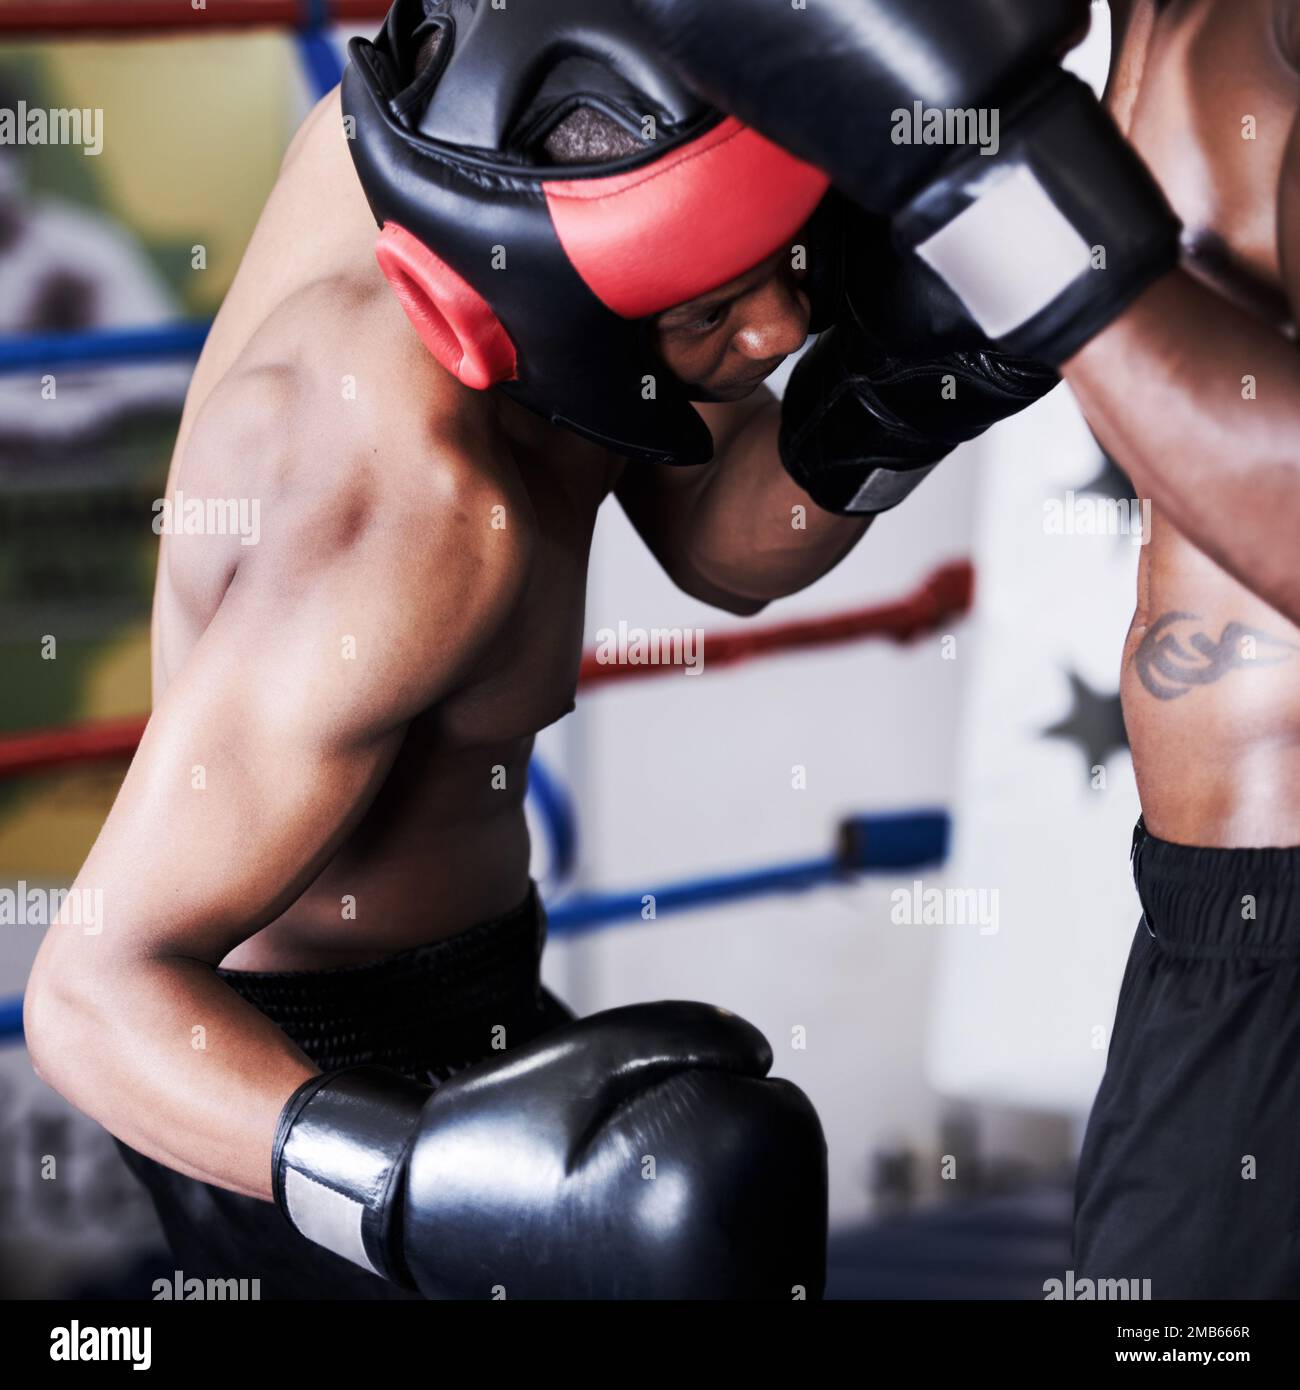 Ducking and diving. A boxer ducking to deliver a punch to his opponents midriff. Stock Photo